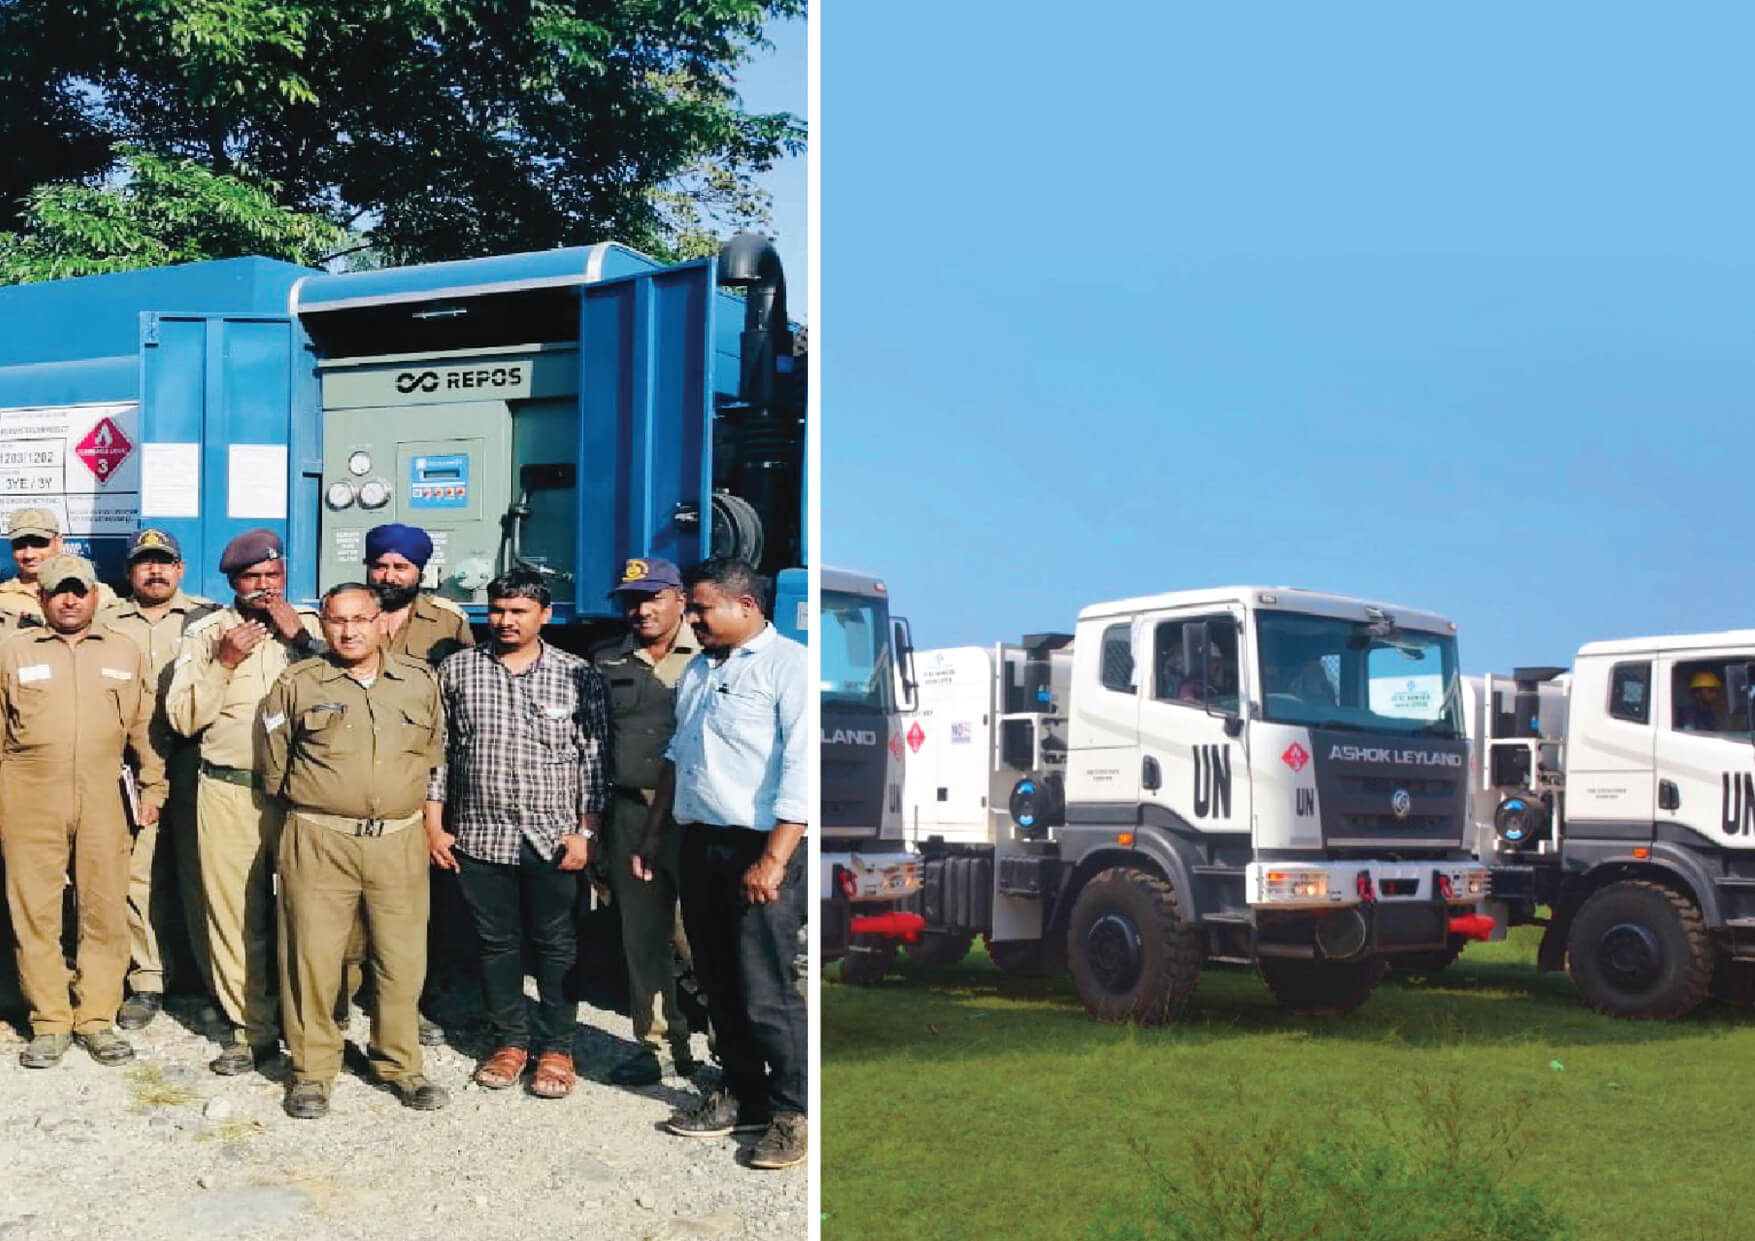 Designing and building Repos Mobile Petrol Pumps for Border Roads Organisation and United Nations was a moment of pride!